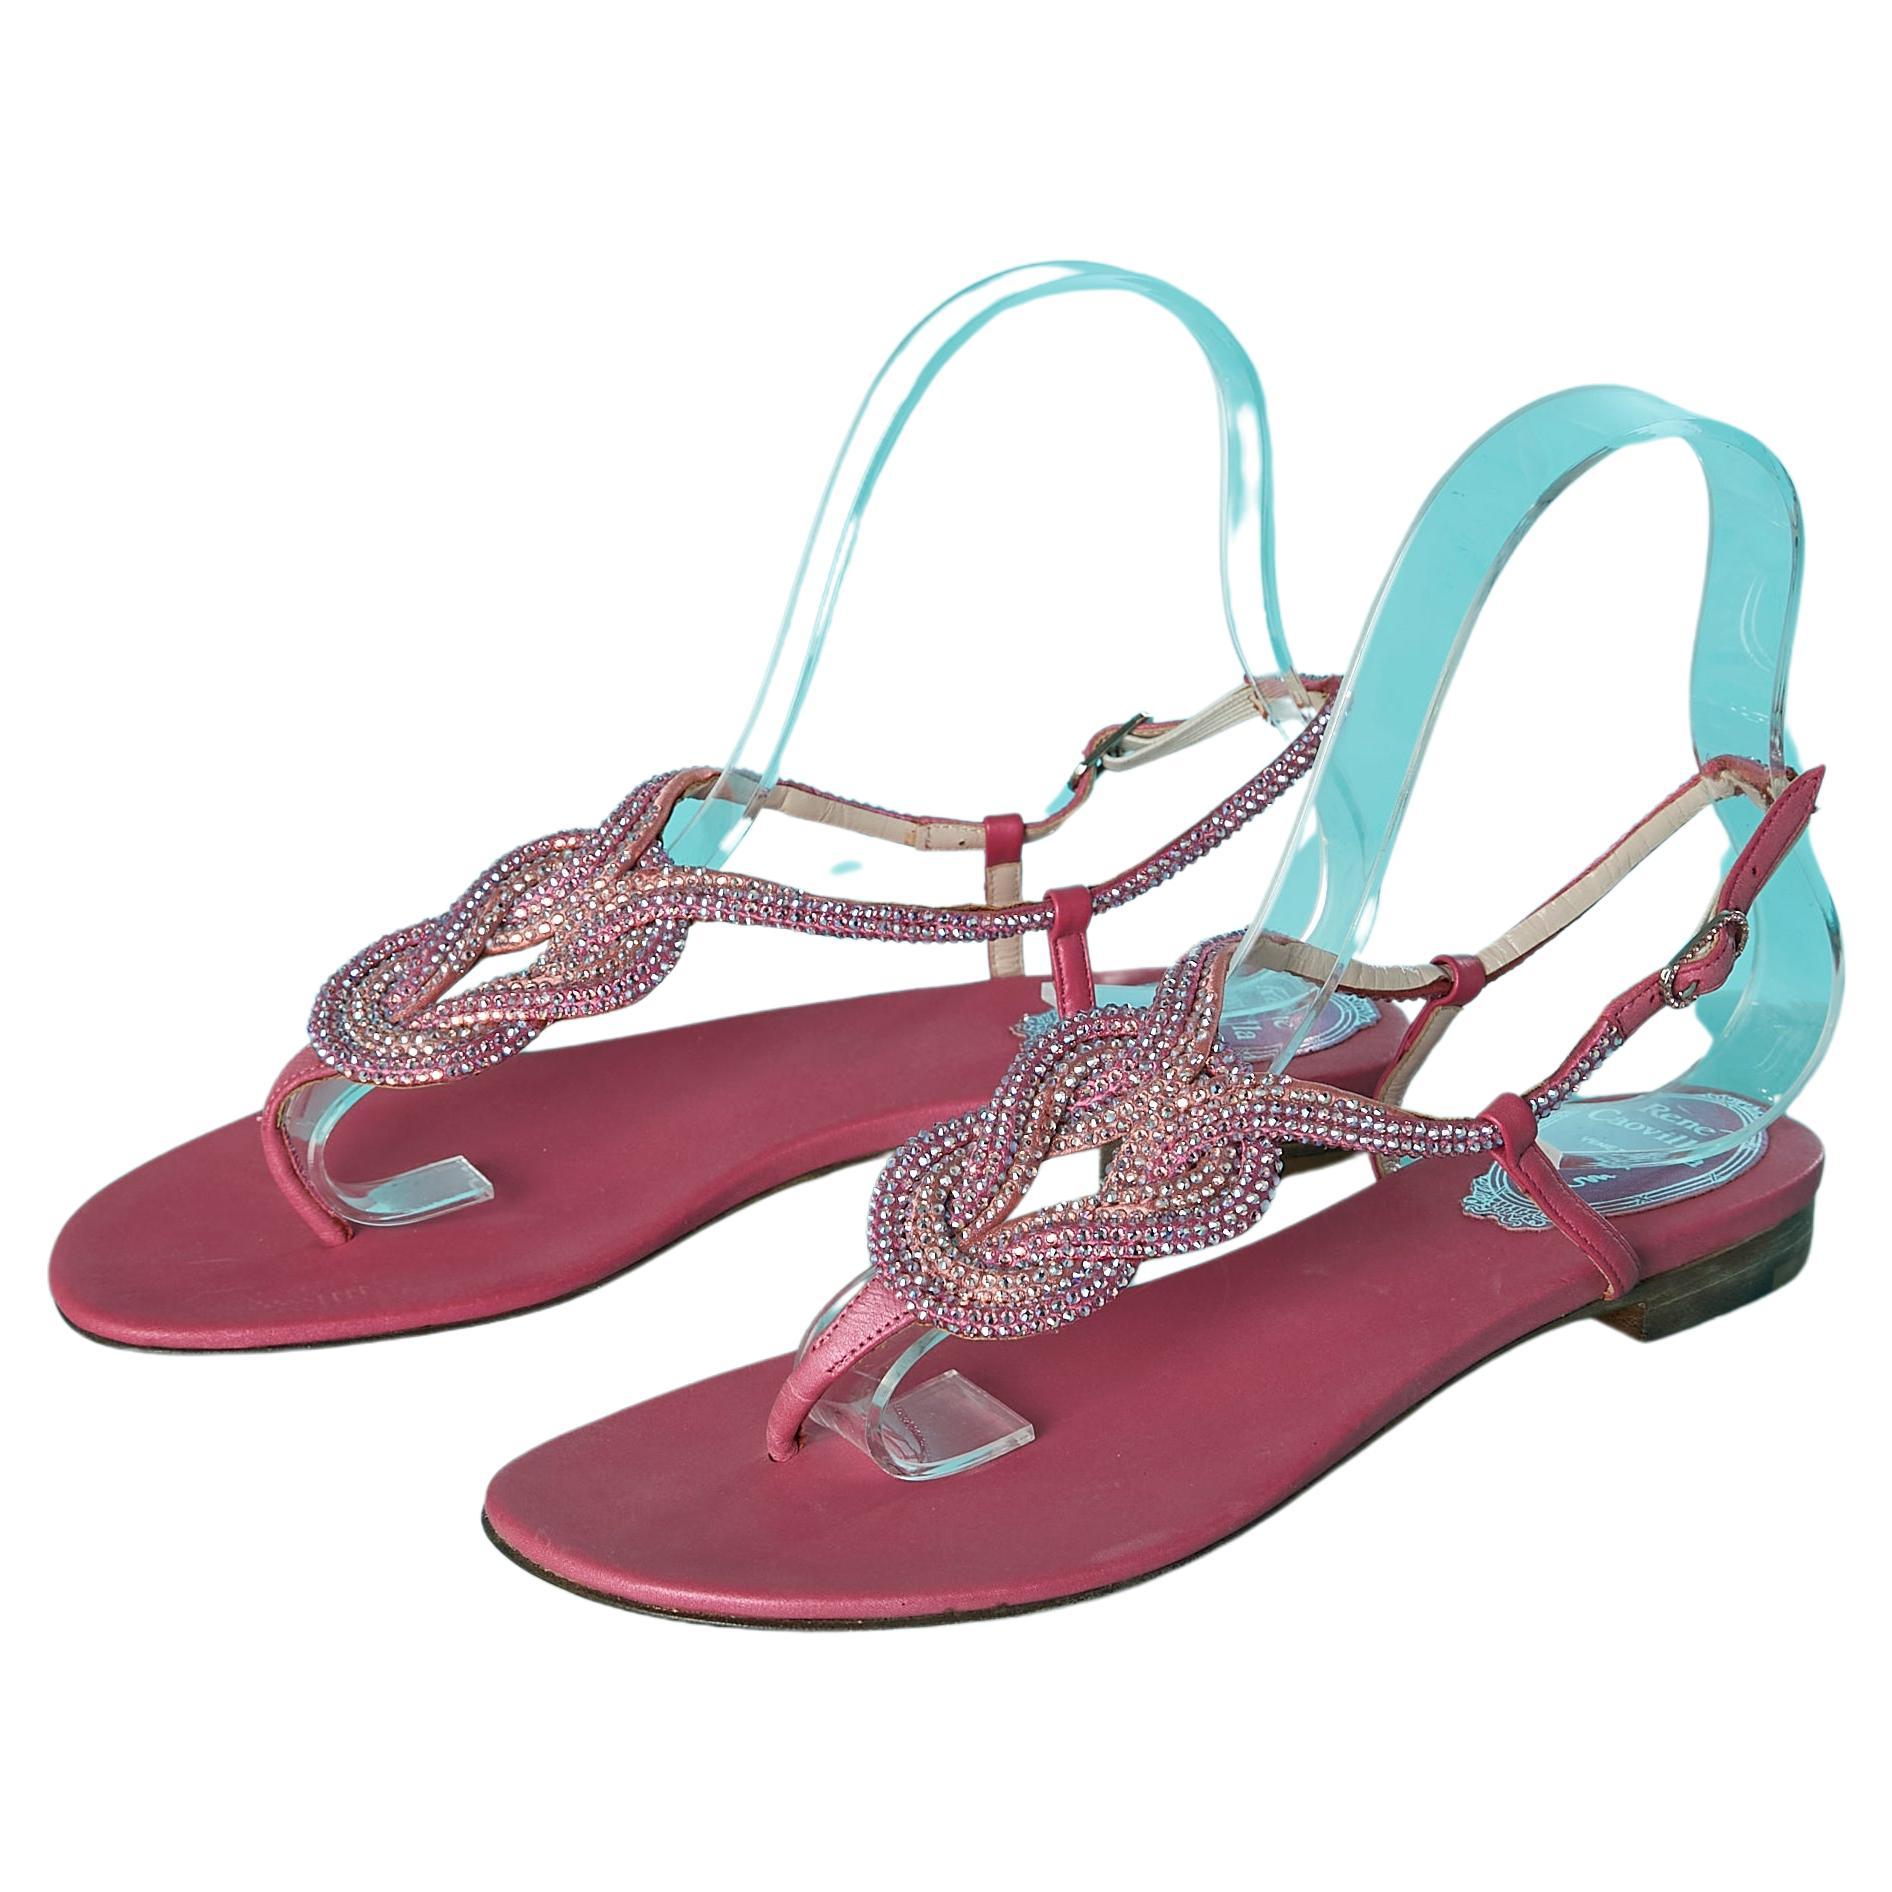 Flat evening sandals in pink satin and rhinestone René Caovilla  For Sale